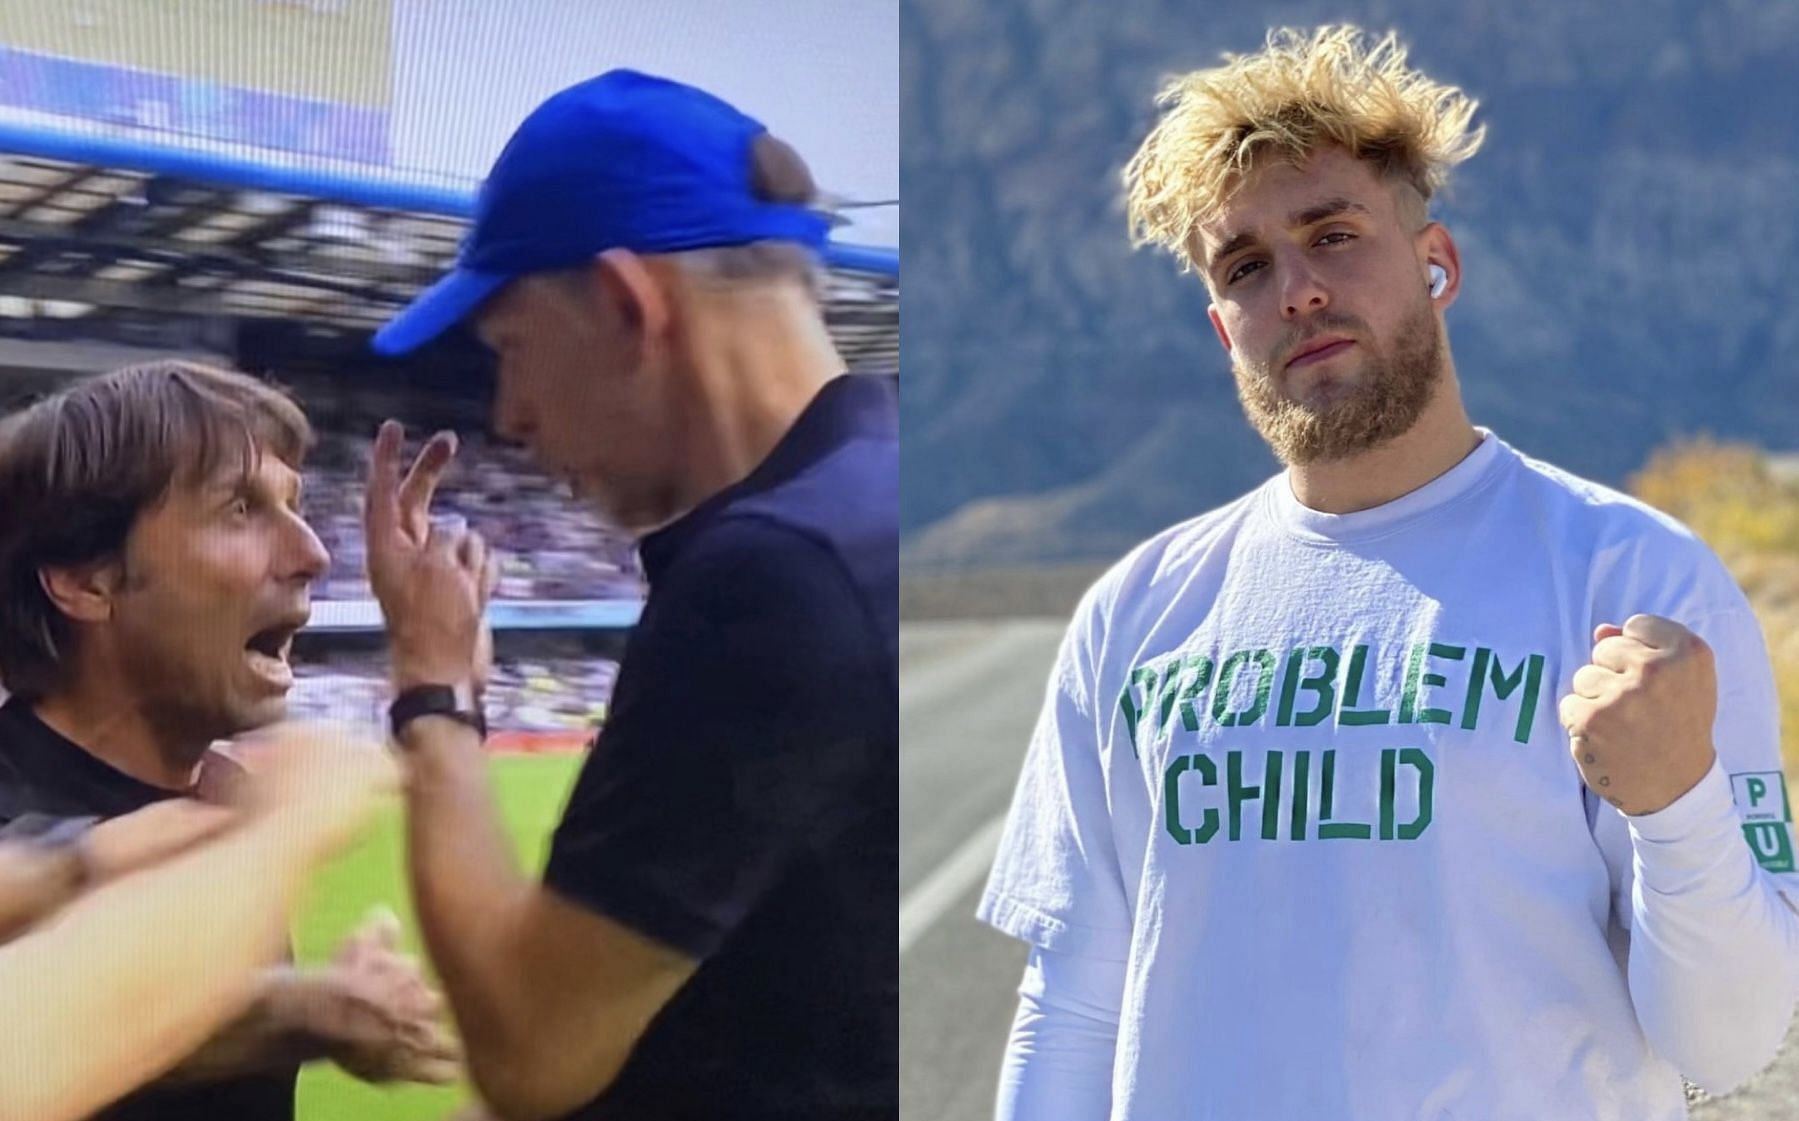 Antonio Conte (left) and Thomas Tuchel (right), Jake Paul (right) - Images via @442oons and @jakepaul on Instagram